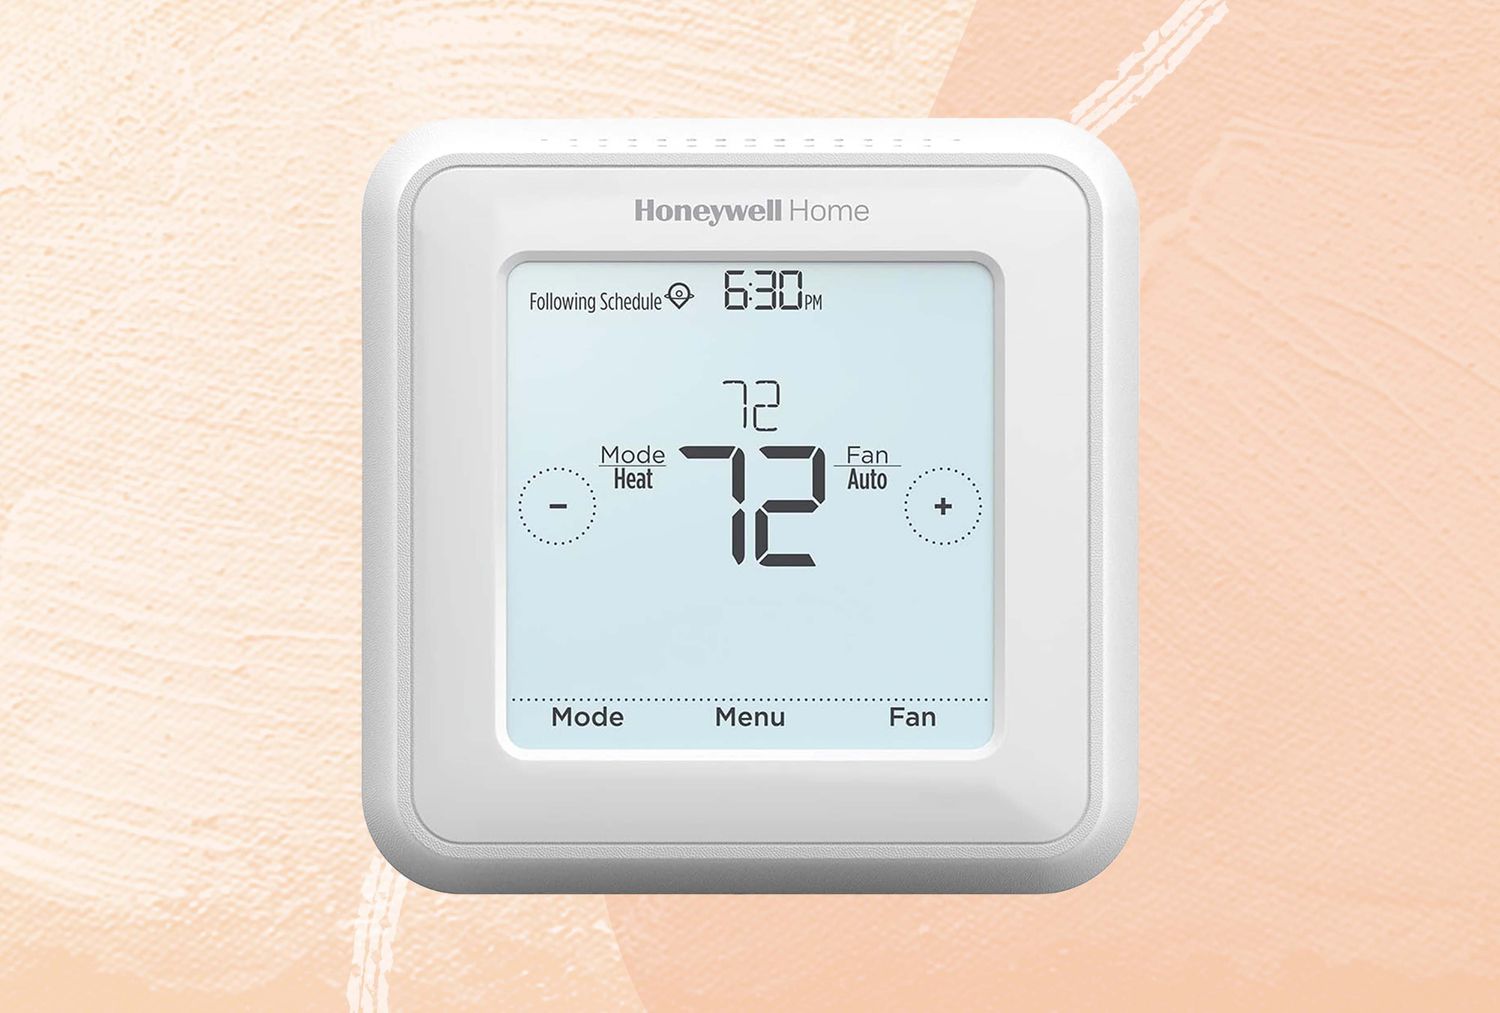 Honeywell TH5220D1029 Focuspro 5000 Non-Programmable Thermostat With Screen  Cleaning Kit 